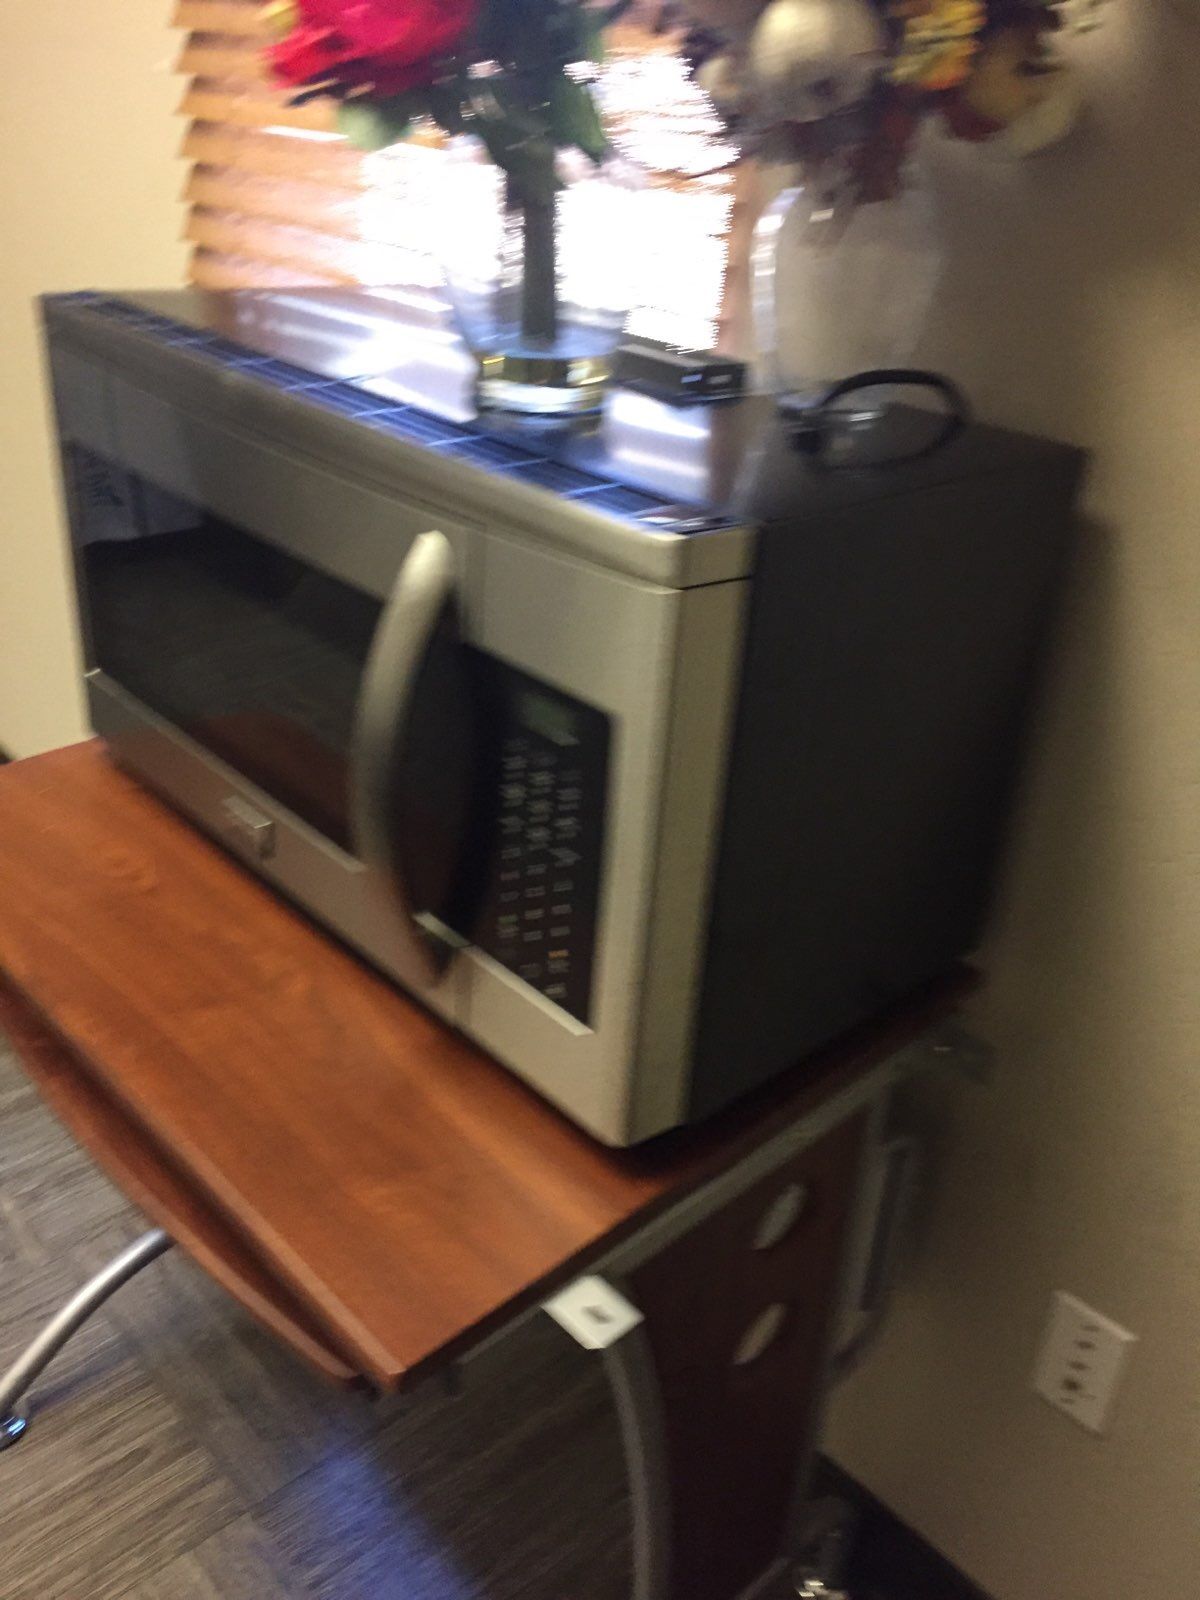 Range microwave in excellent condition. $100.00